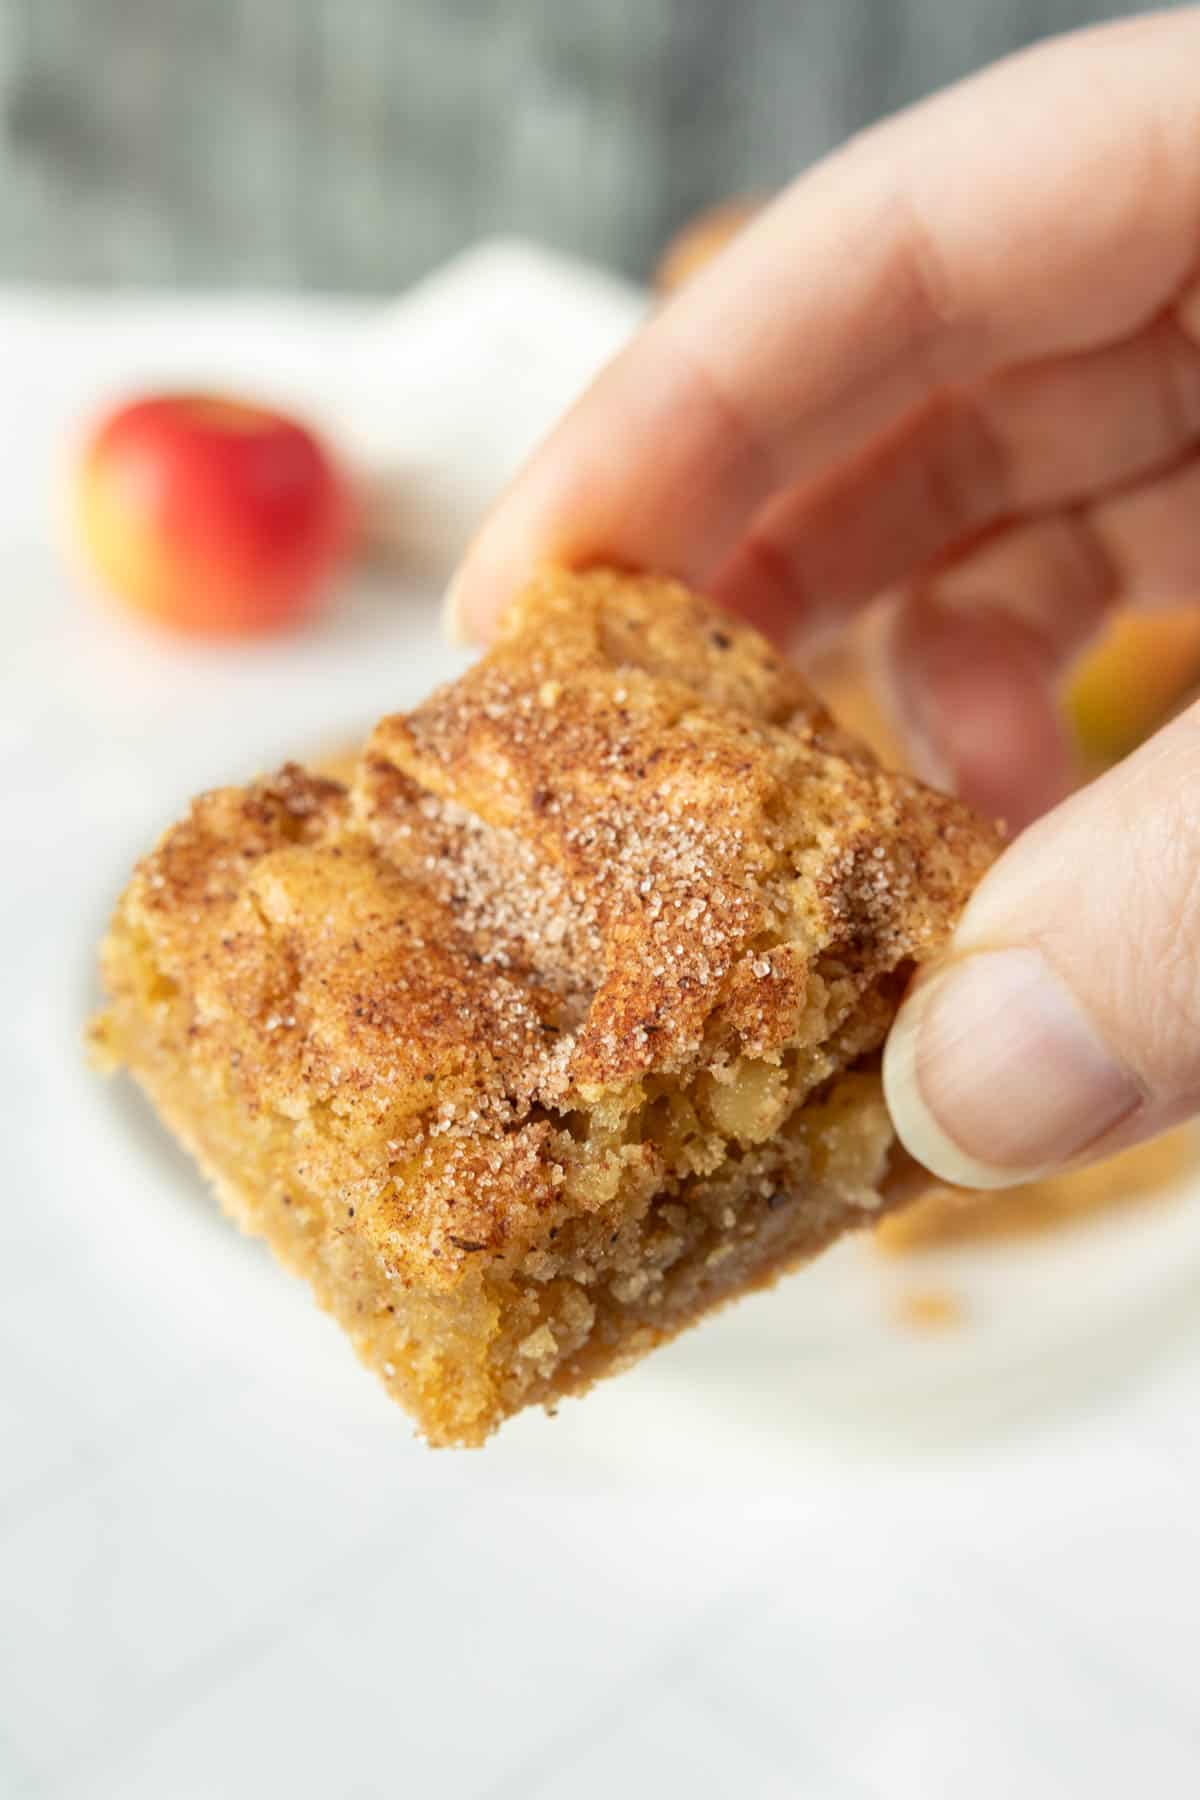 A person holding a small piece of cinnamon apple squares.